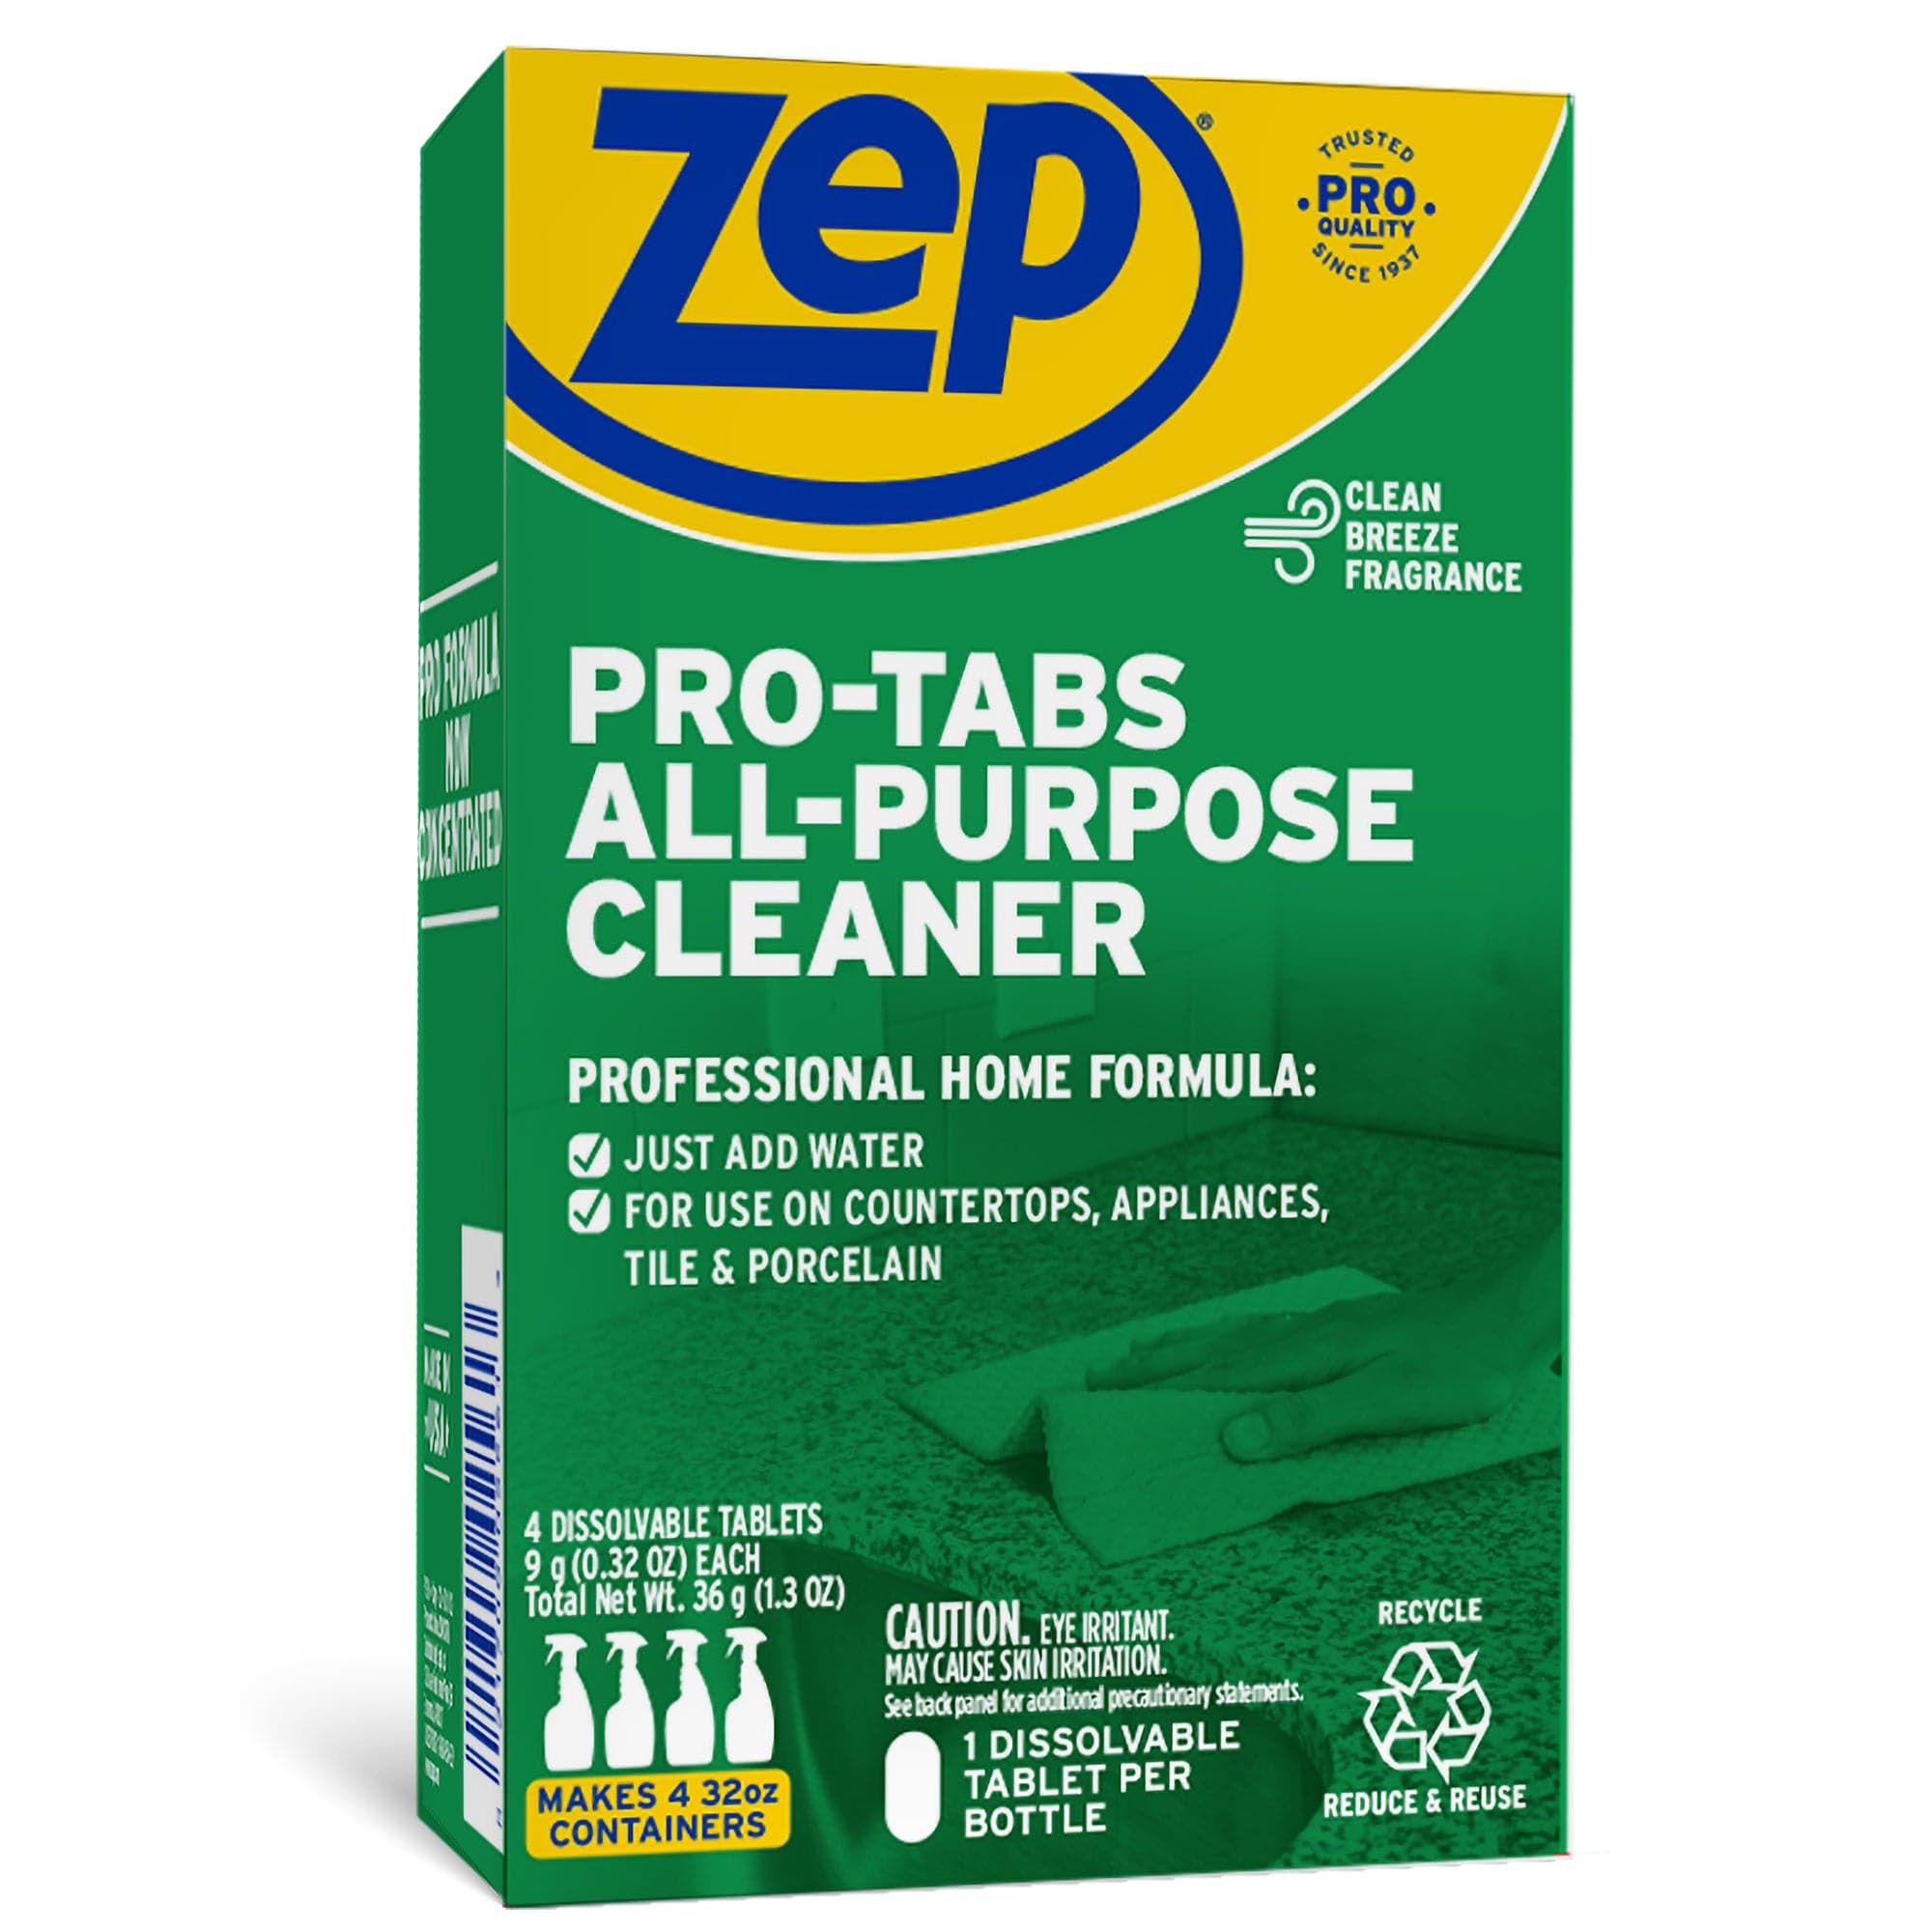 Image for Pro-Tabs All Purpose Cleaner Dissolvable Tablets - 4 Tablets Per Box (10 Pack)